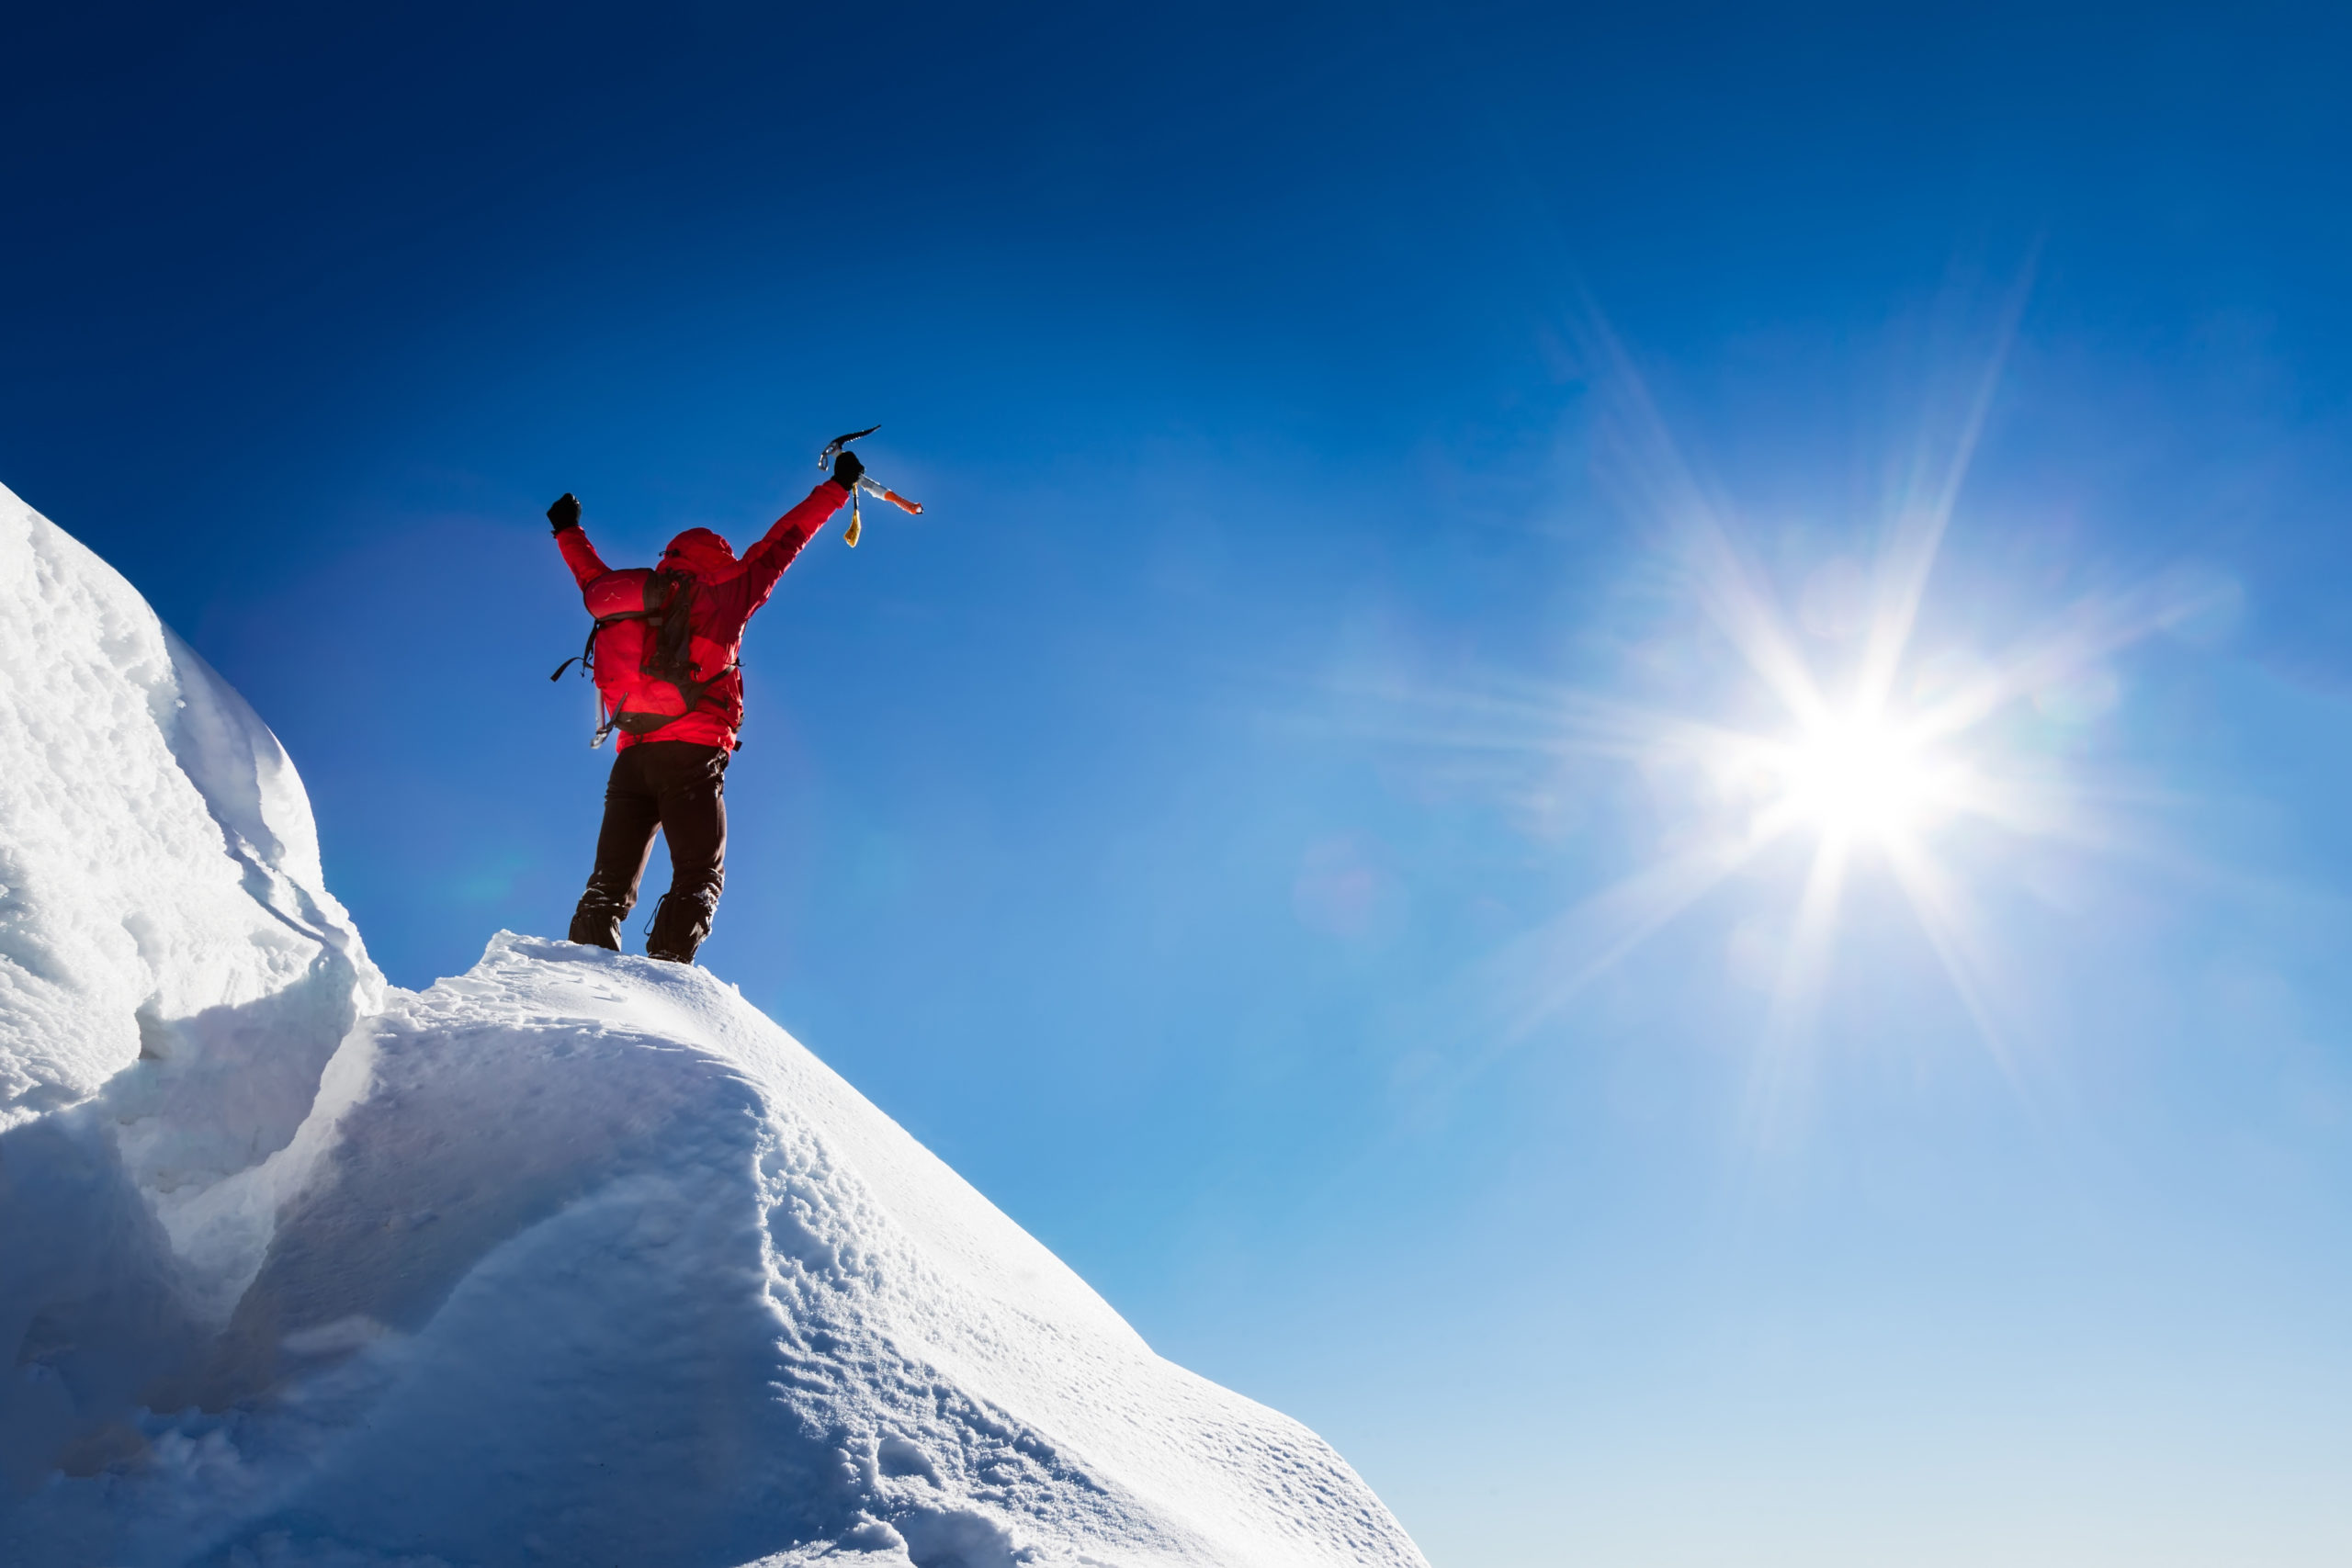 Person in snow gear with backpack standing on snowy peak raising arms in triumph.